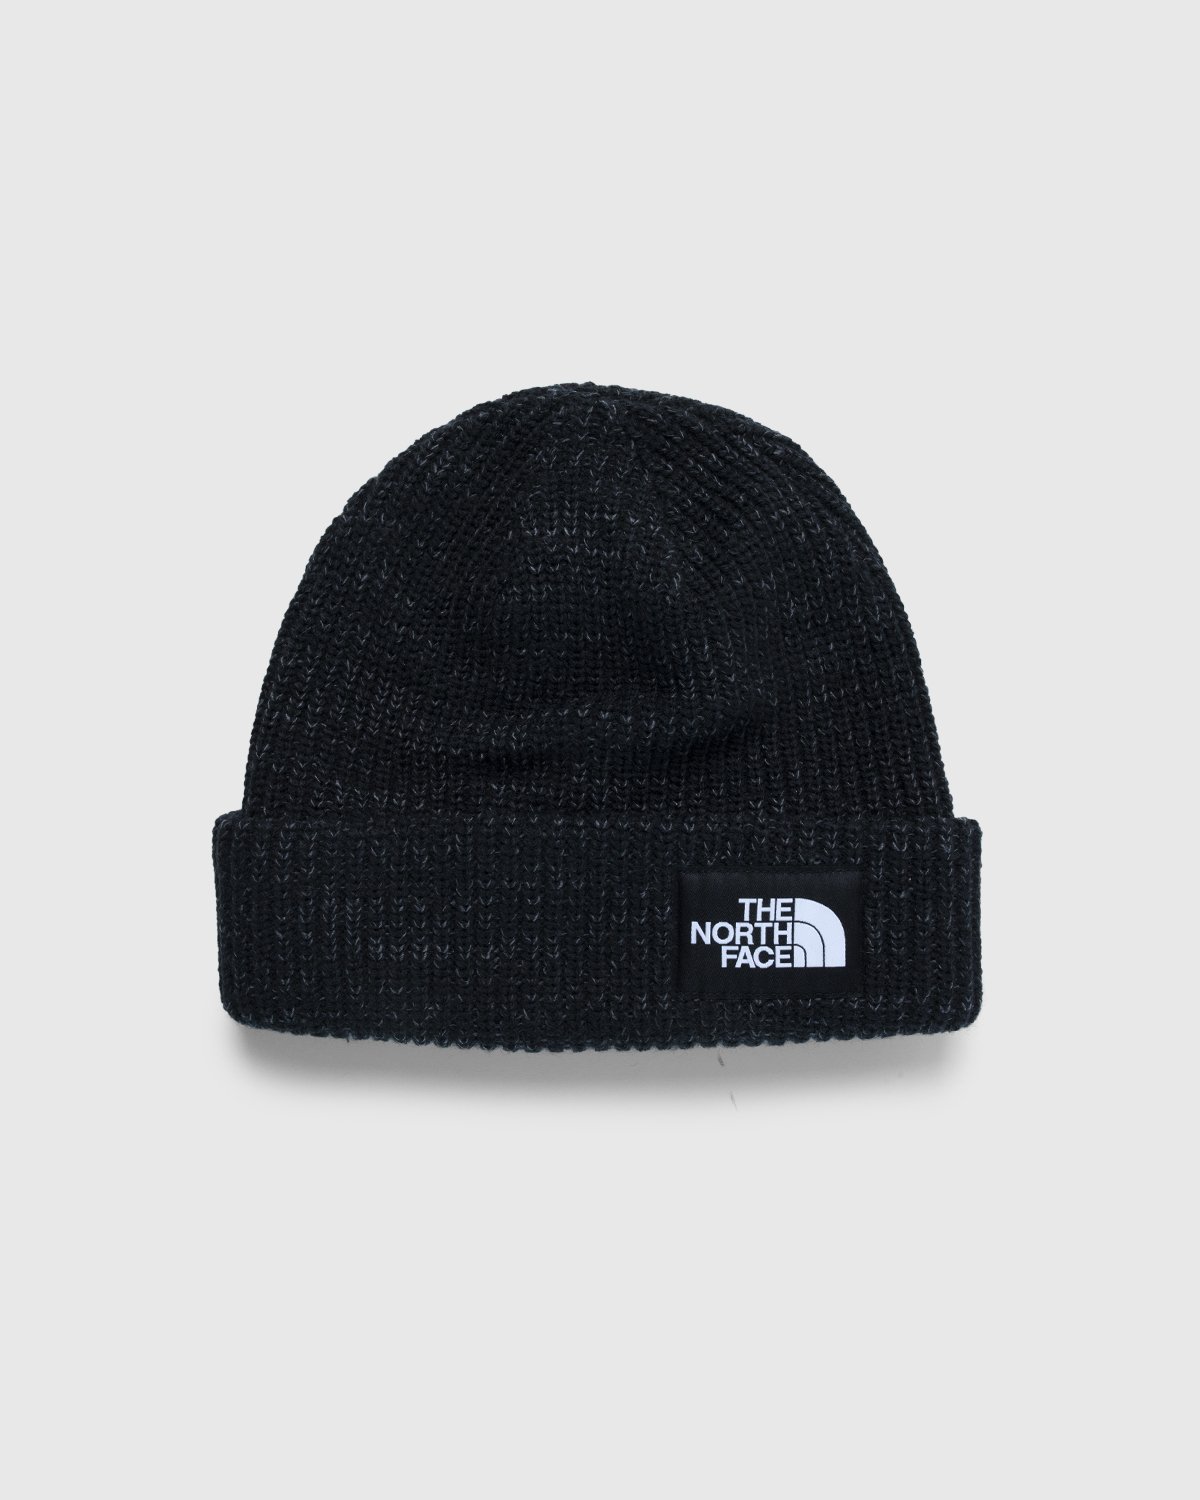 The North Face - Salty Dog Beanie Black - Accessories - Black - Image 1